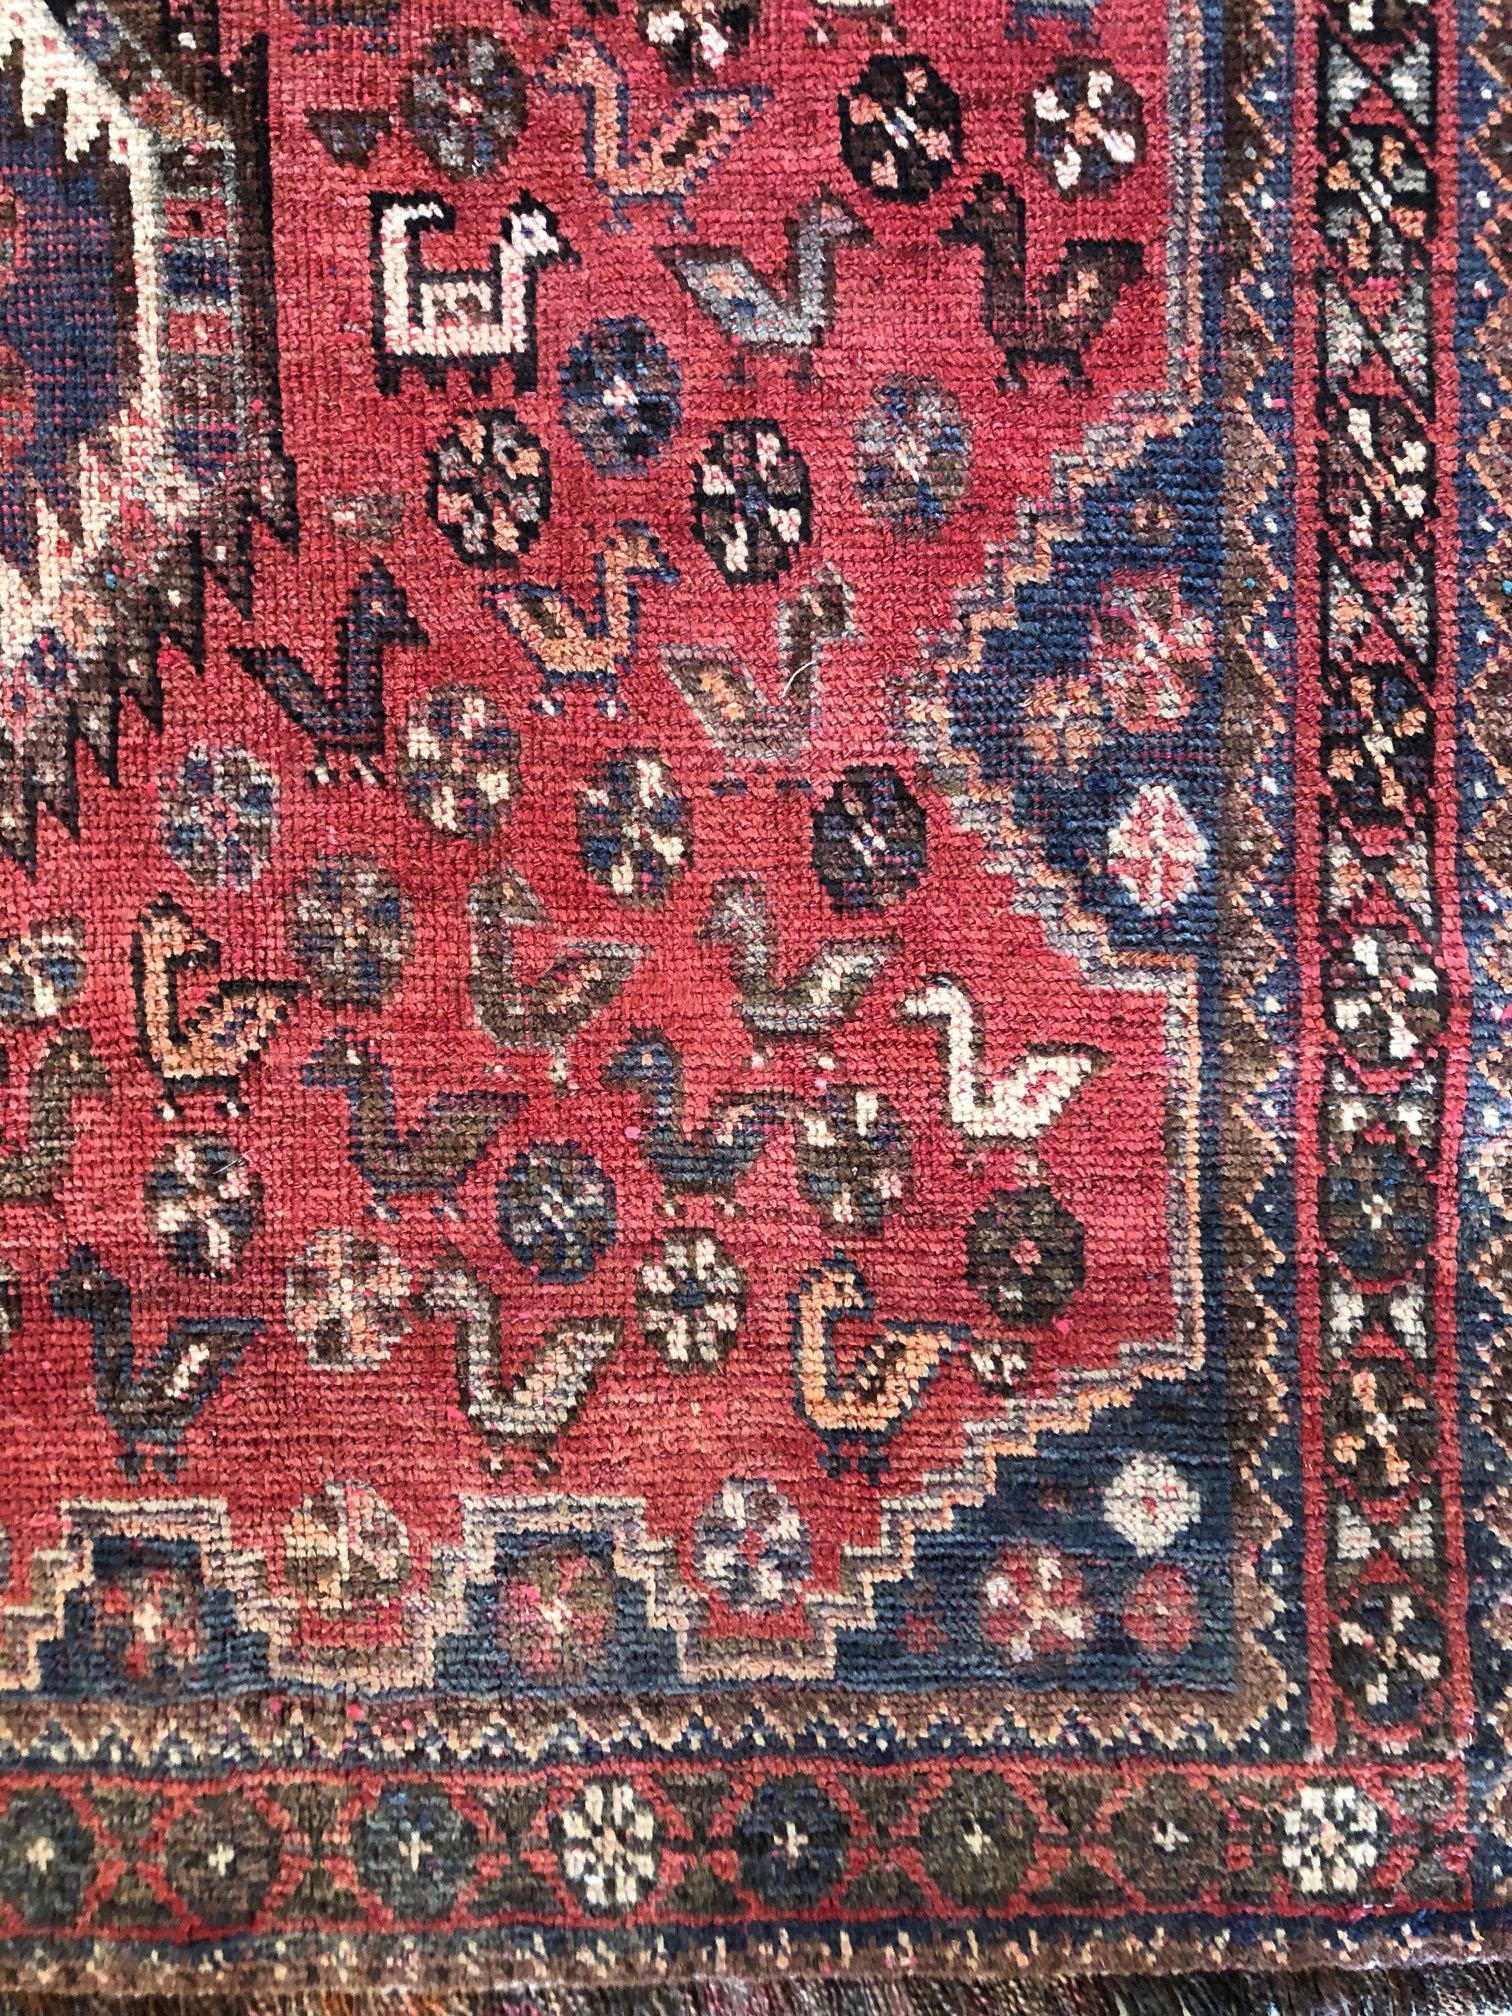 20th Century Persian Hand-Knotted Repeated Medallion Red Shiraz Bird Motif Rug